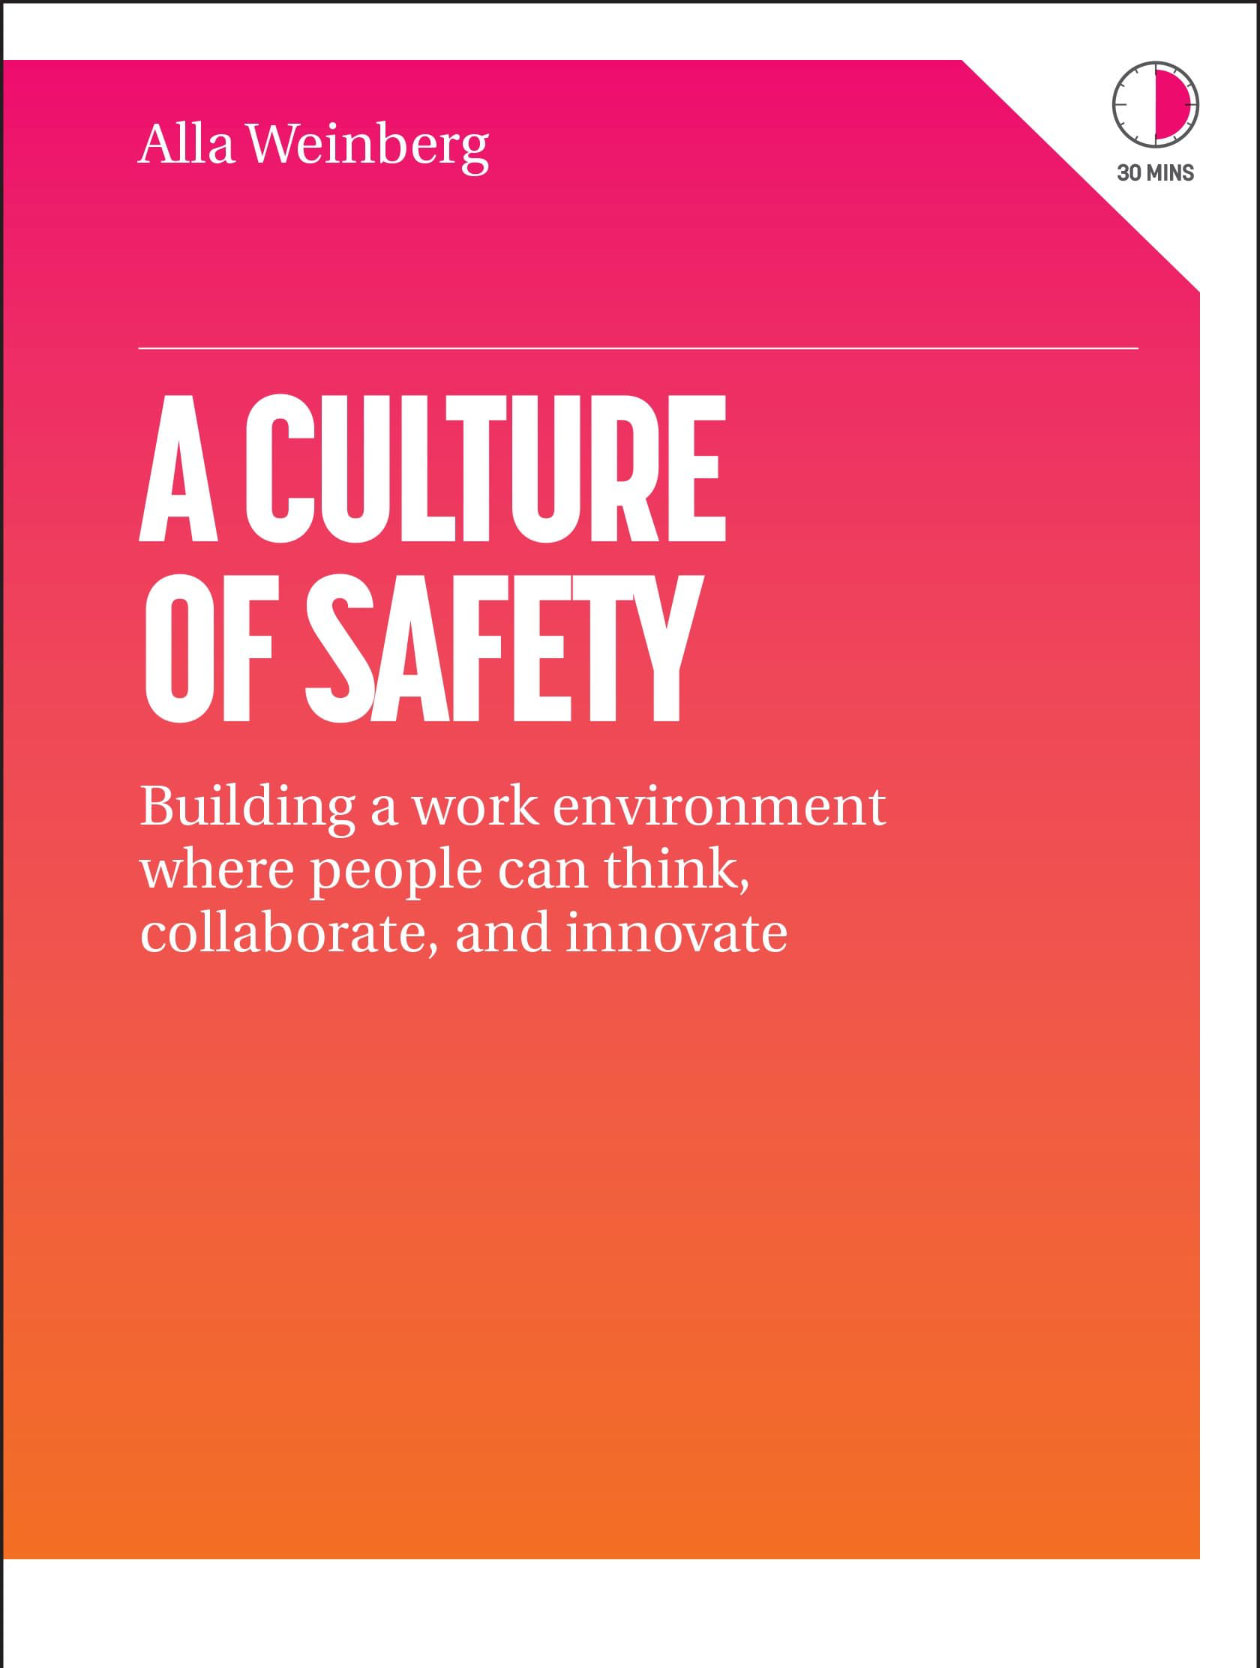 A Culture of Safety by Alla Weinberg